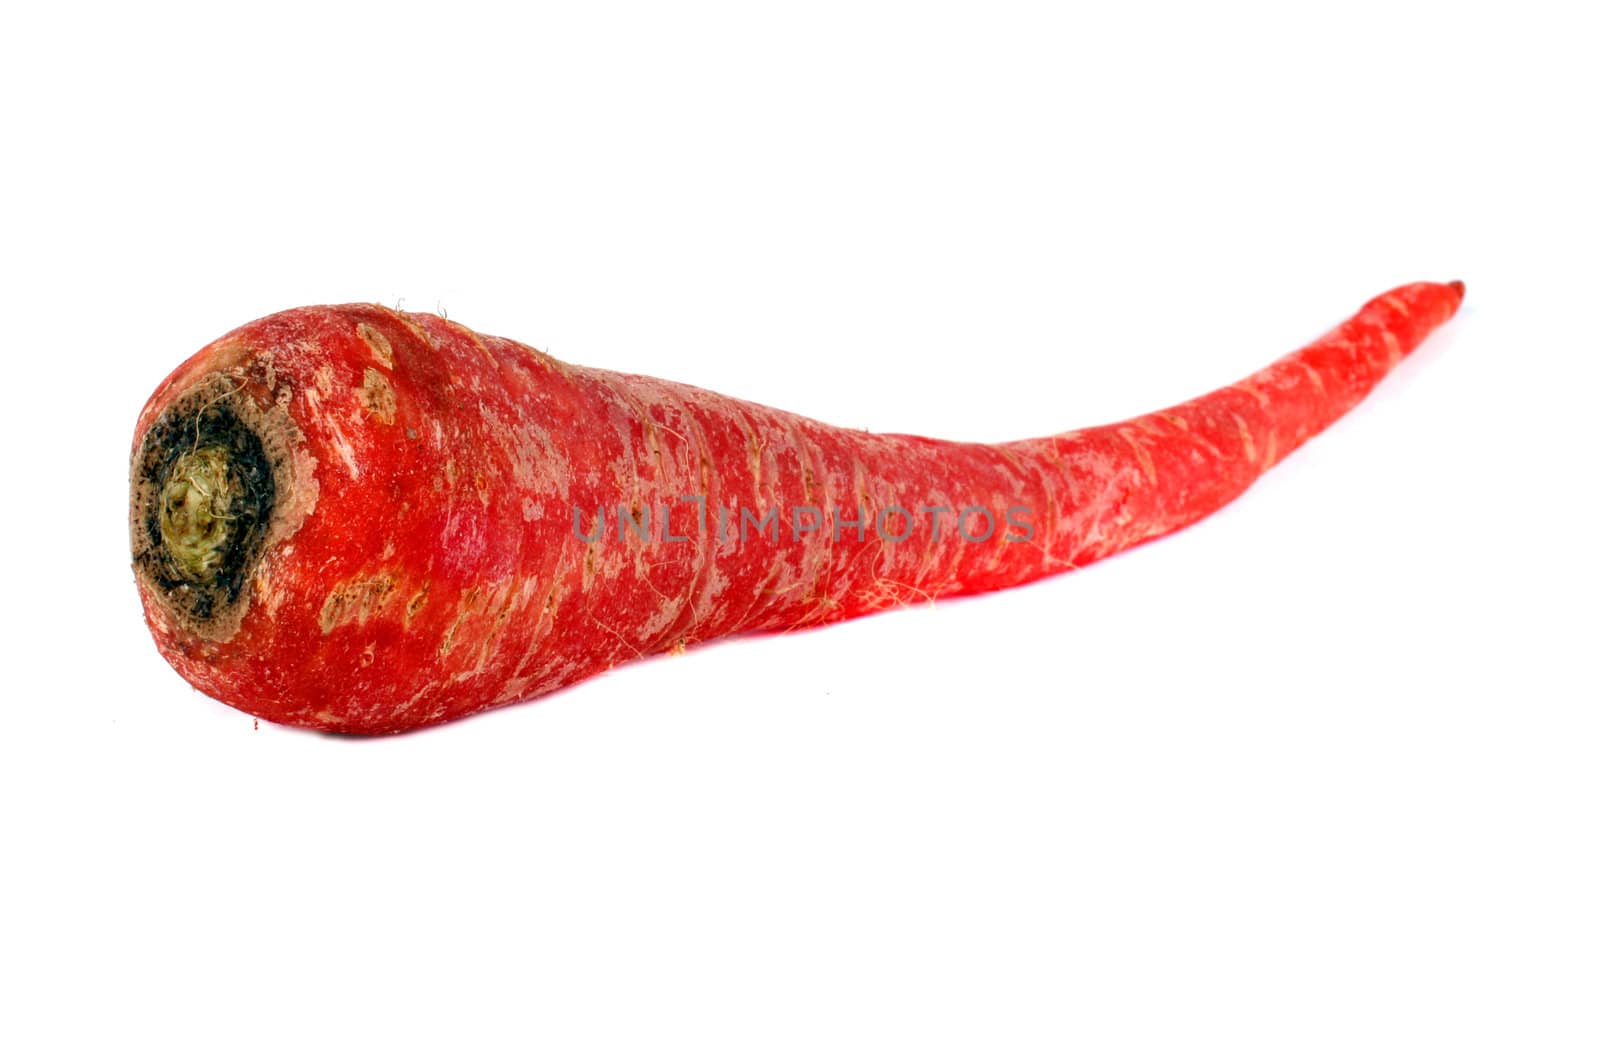 A fresh red carrot, isolated on white studio background.